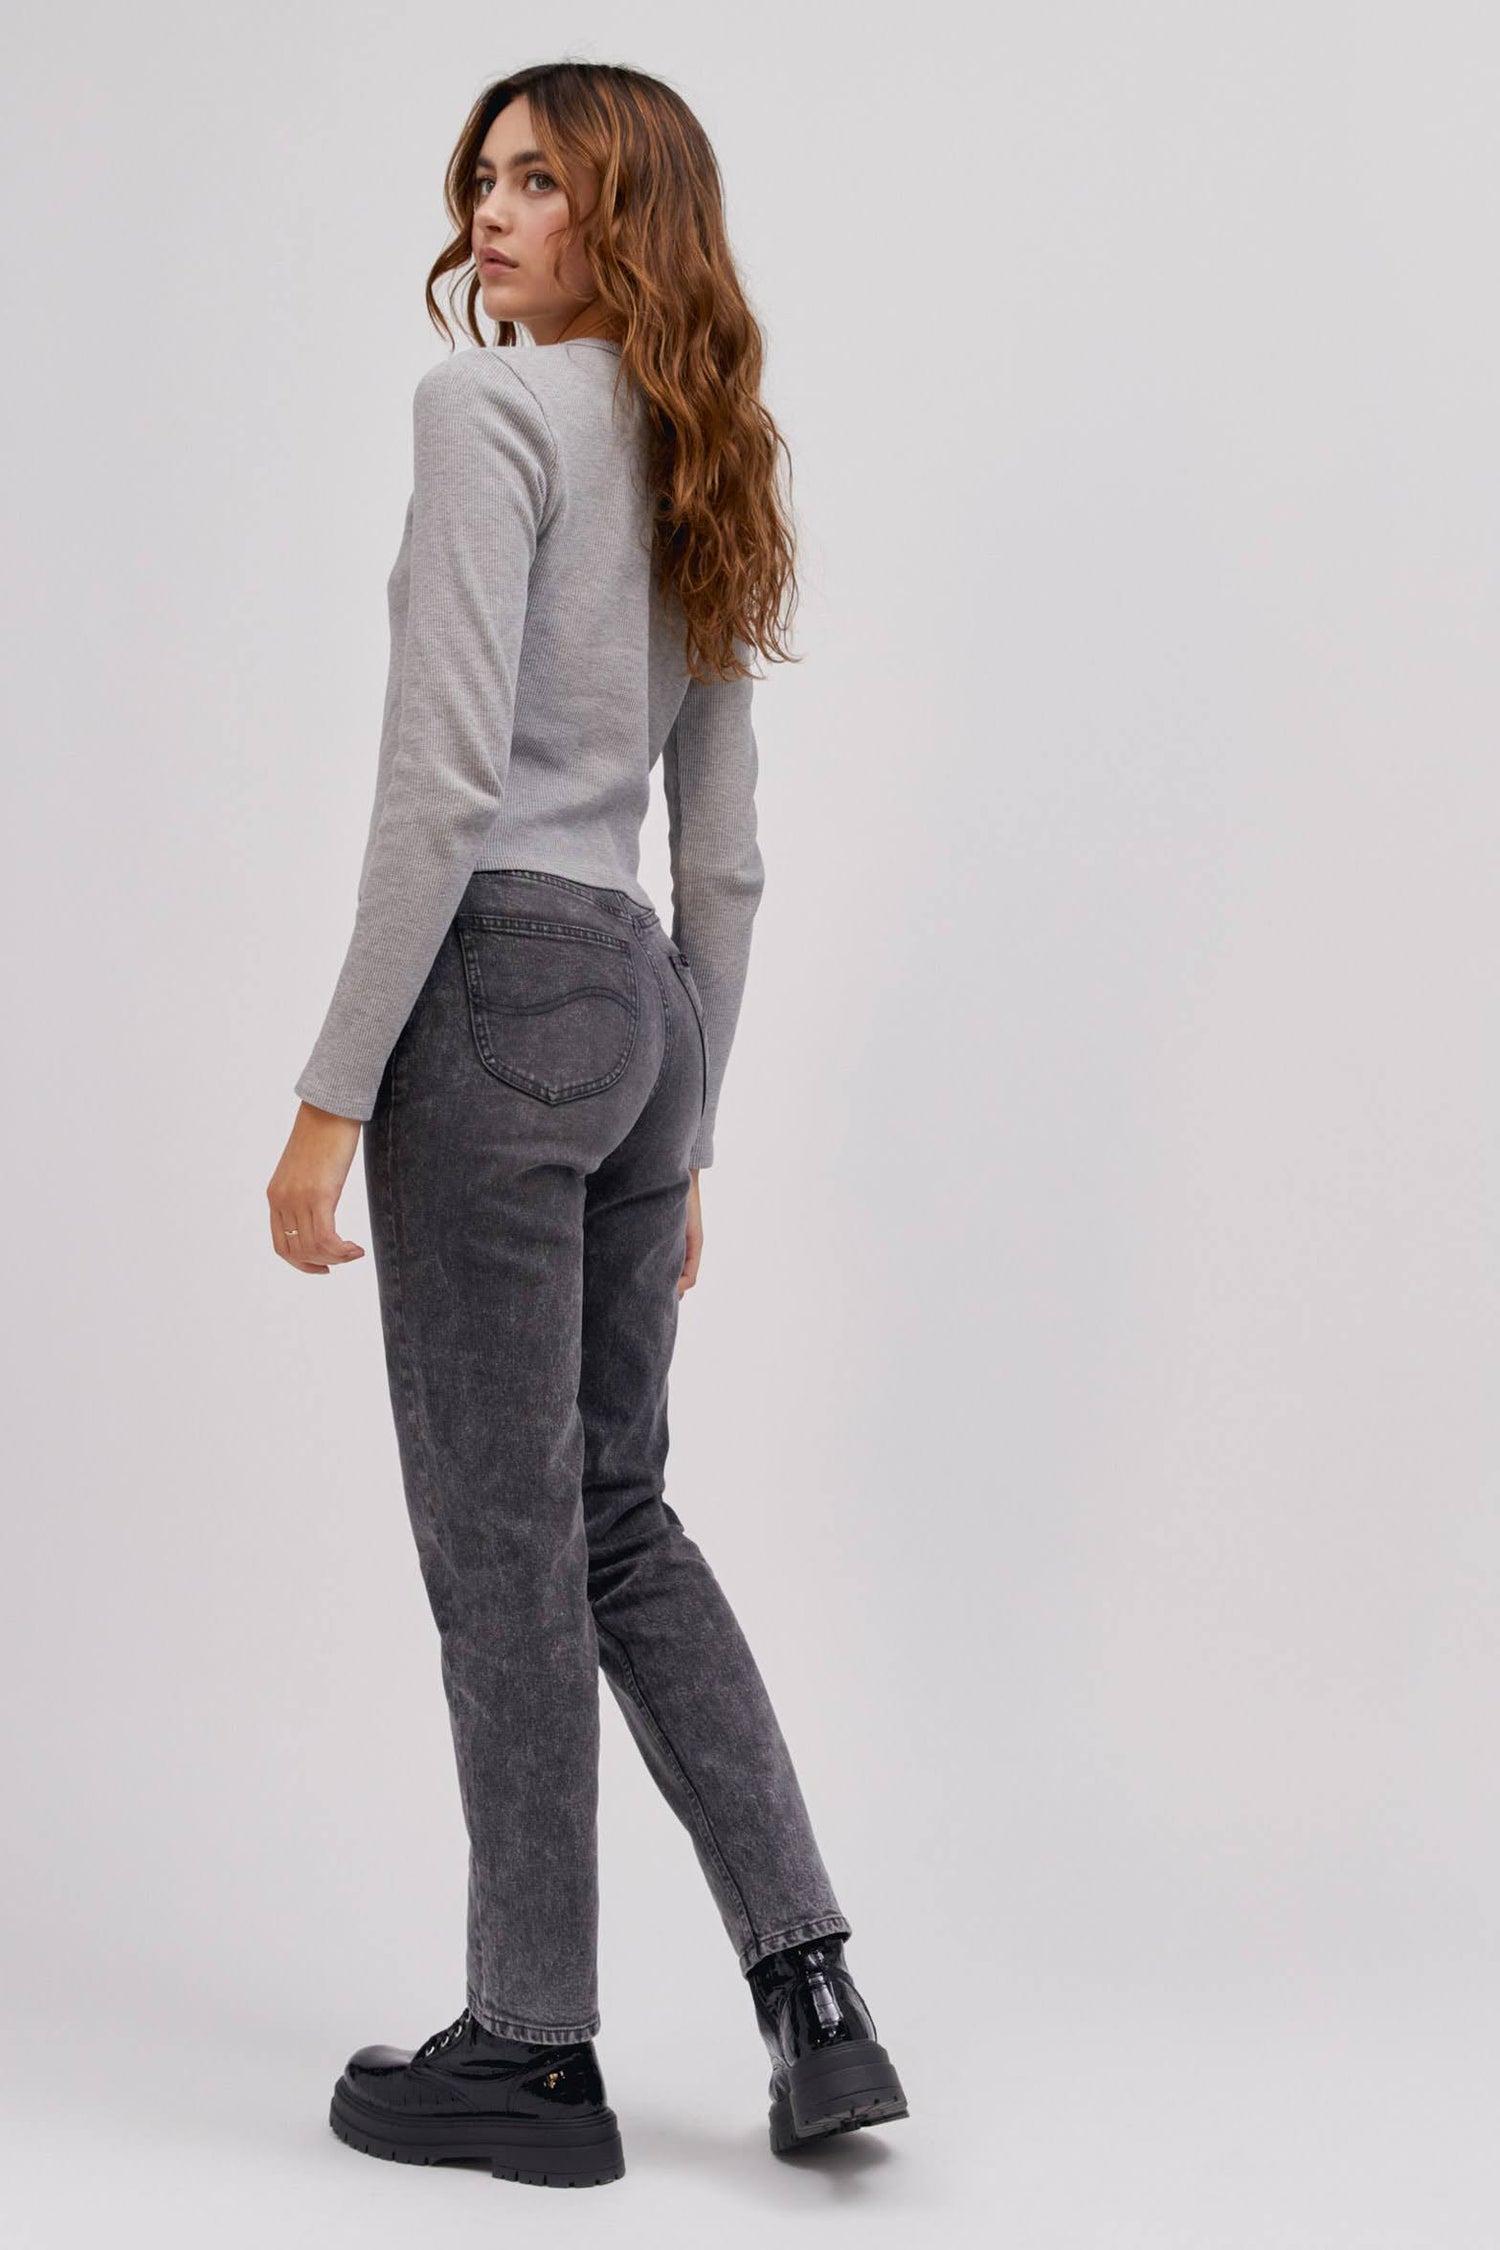 A curly-haired model featuring a grey classic lightweight thermal with a sharp turn colored high rise and straight-legged jeans with a slim fit through the hips.